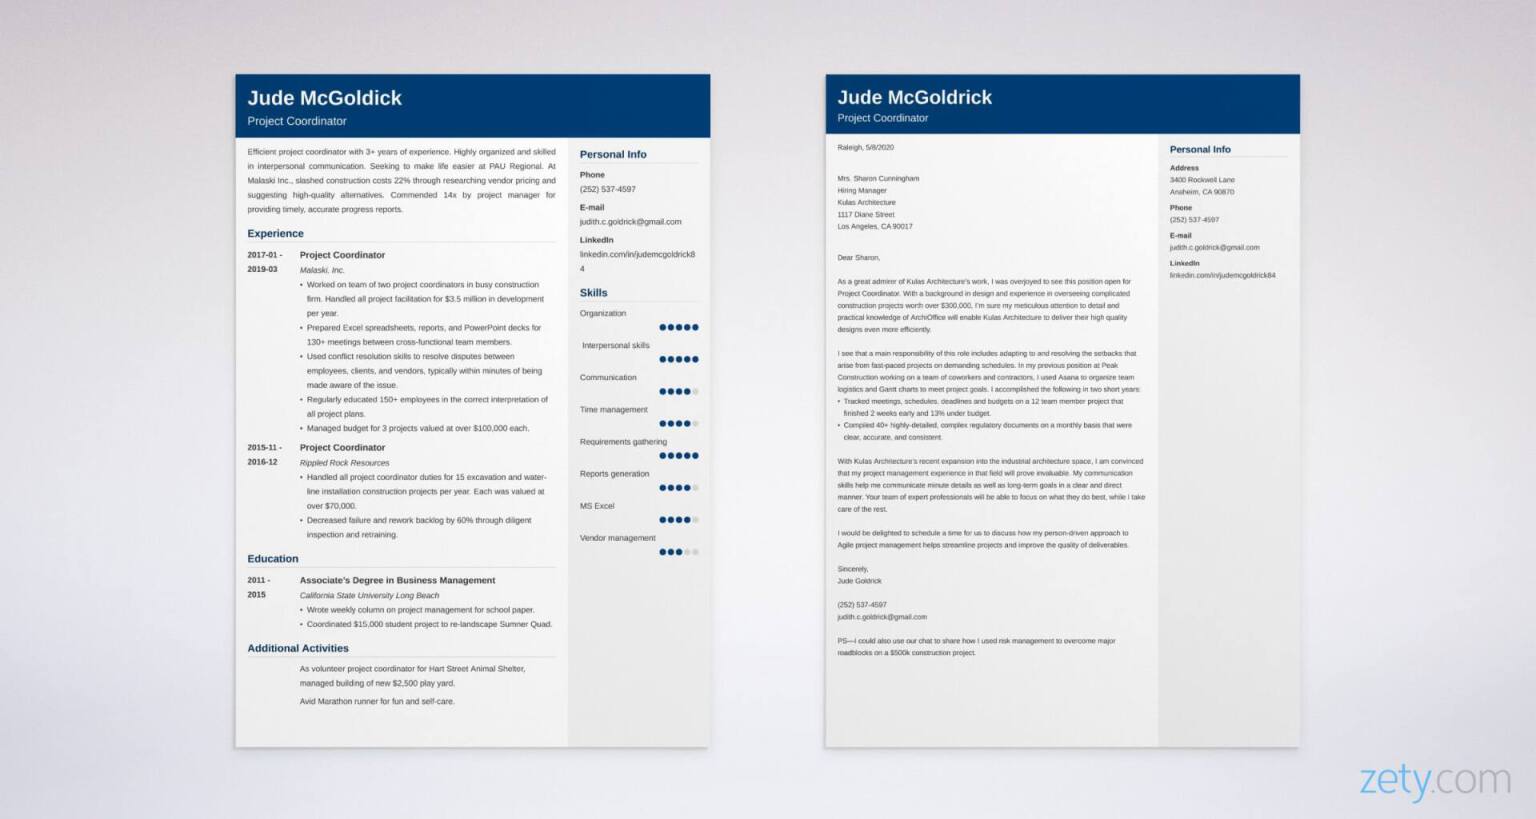 project coordinator resume and cover letter set